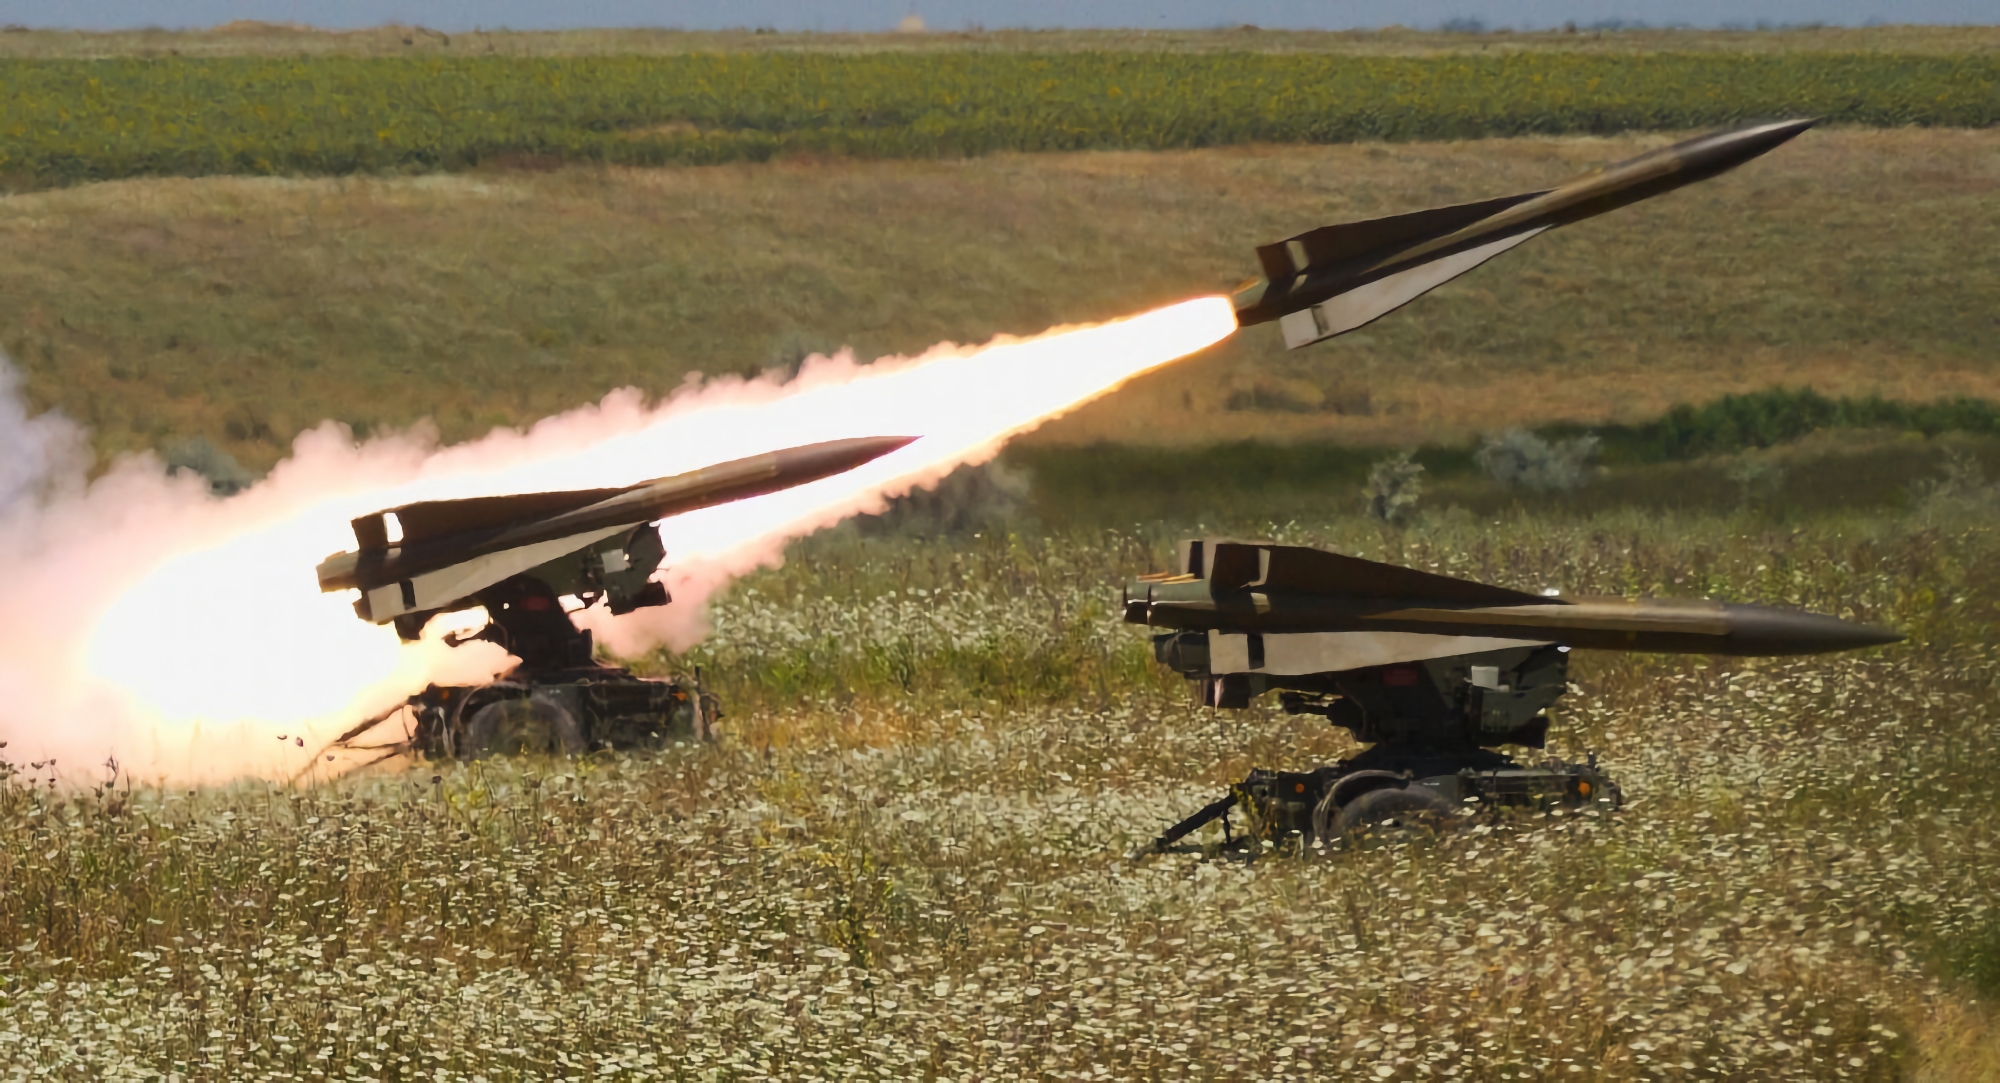 Spain to transfer 6 launchers for MIM-23 Hawk surface-to-air missile system to Ukraine